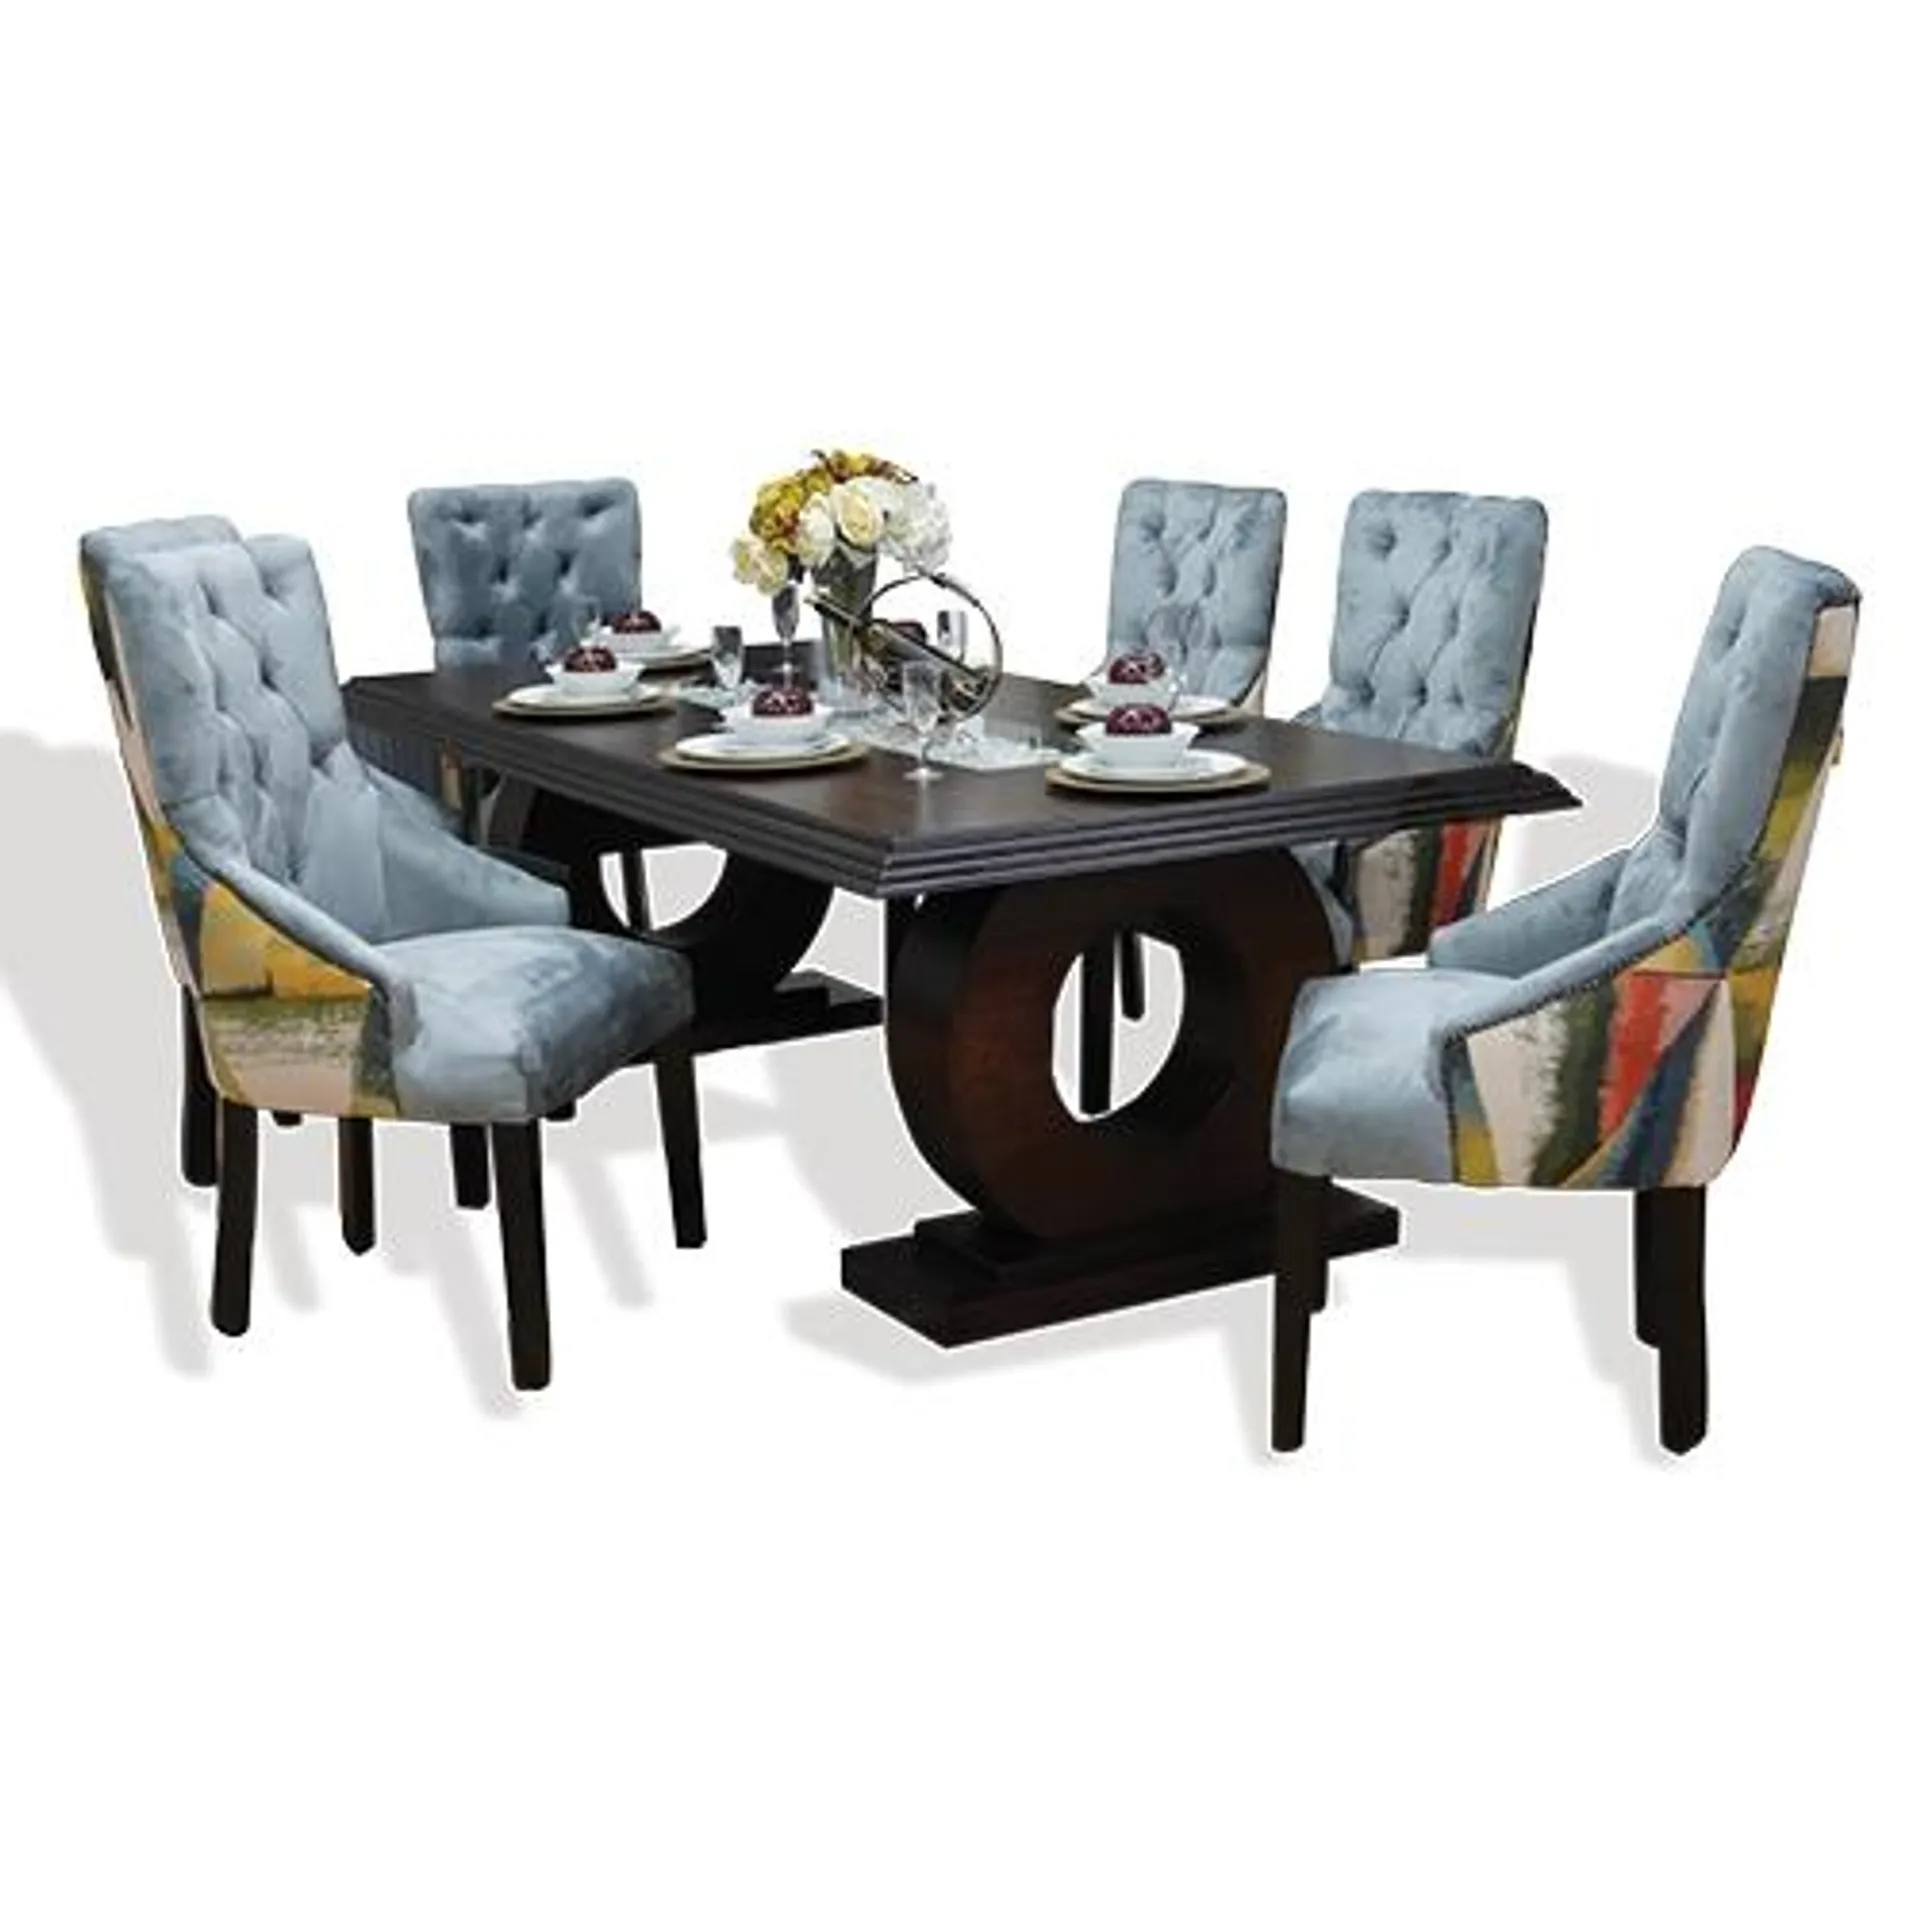 Bali Dining Suite 8 Seater